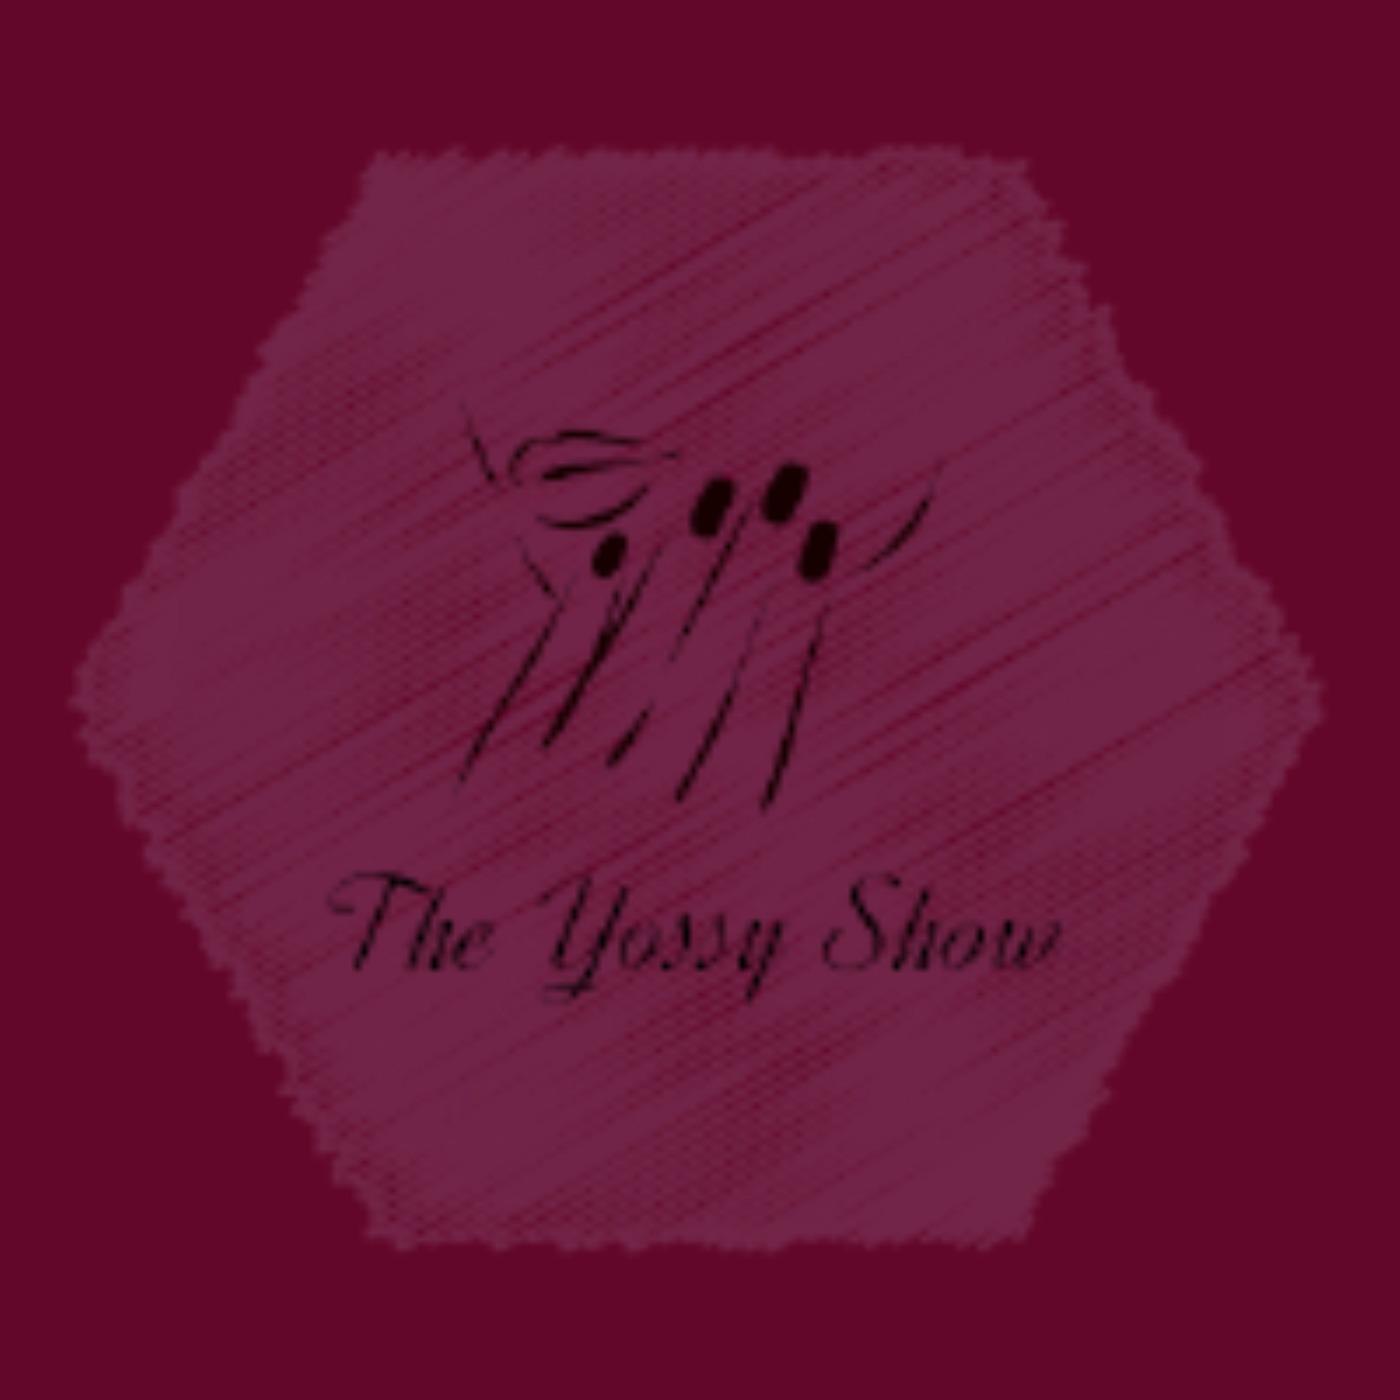 The Yossy Show